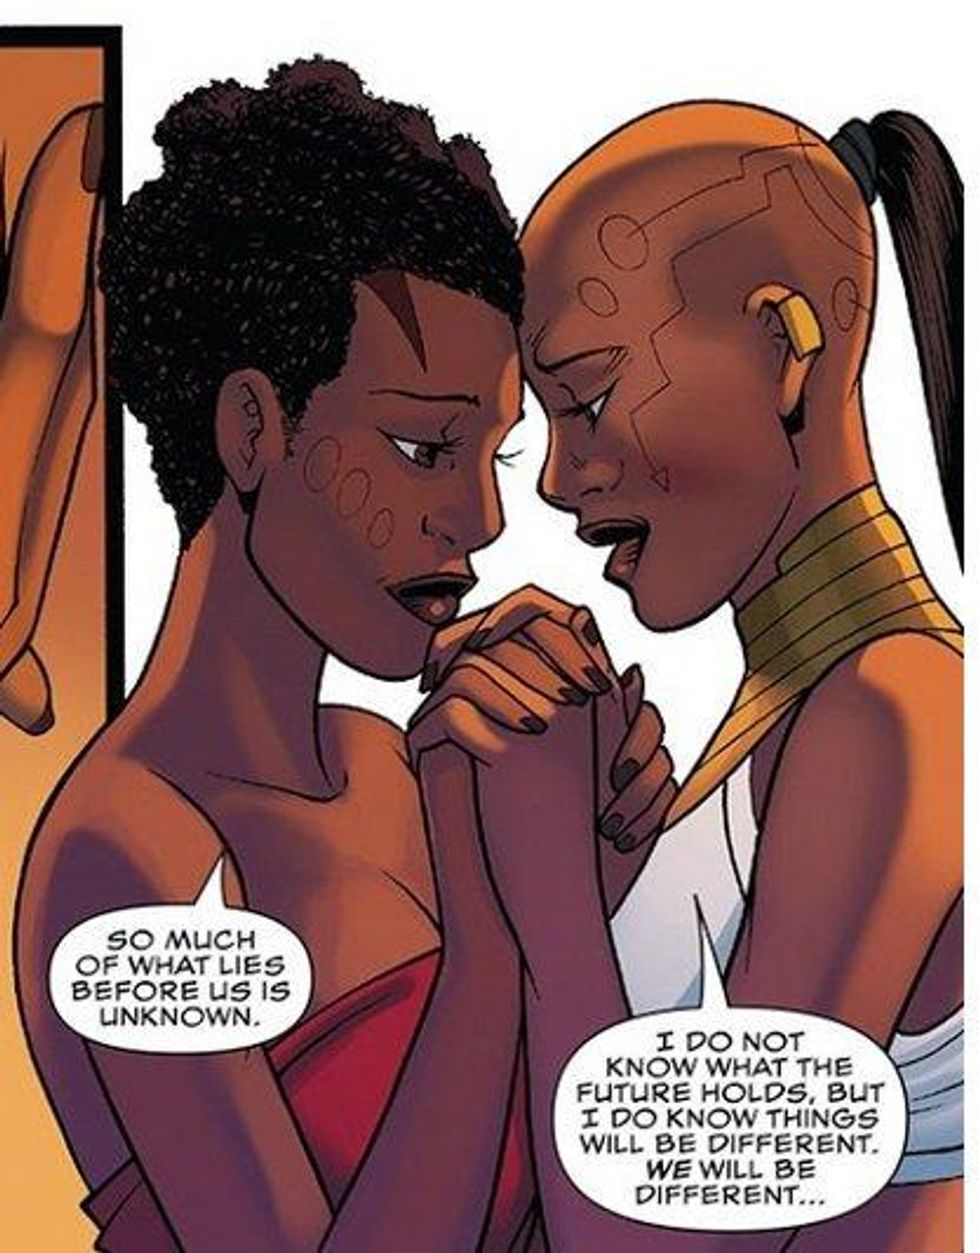 Marvel Comics Lesbian Porn - The 'Black Panther' Lesbian Romance That Almost Was